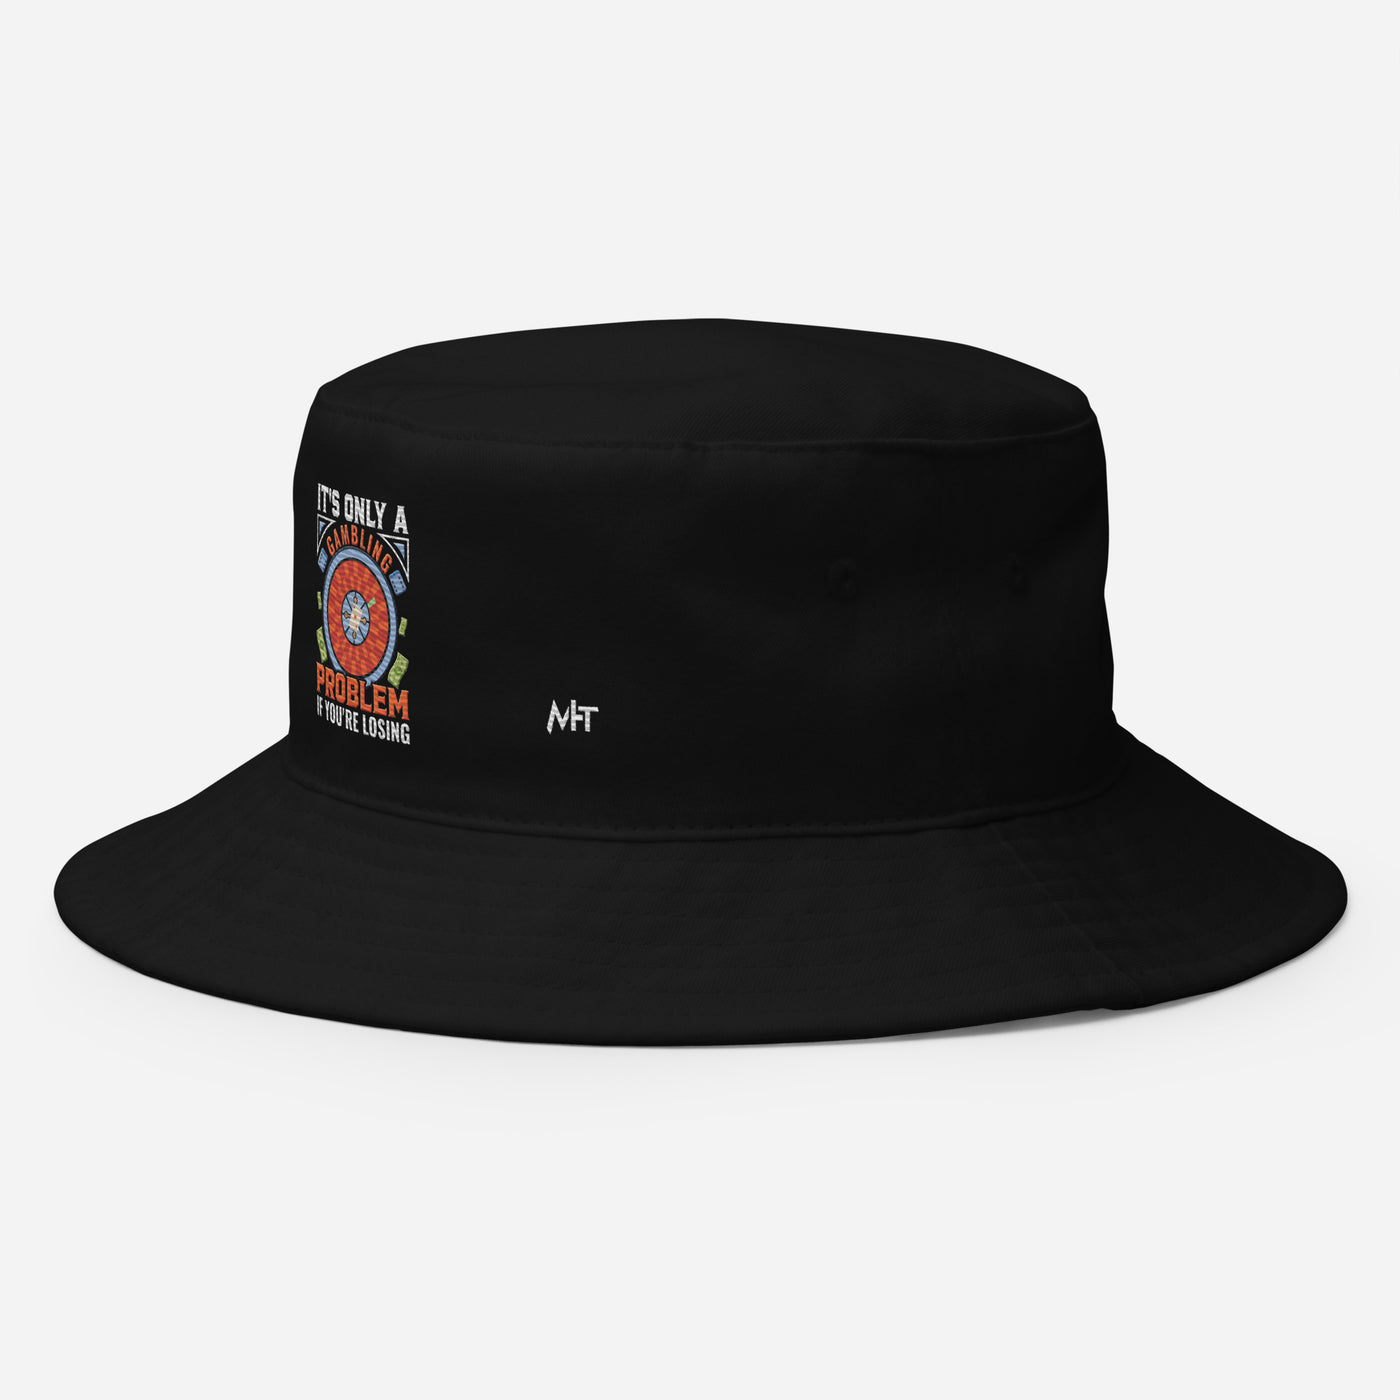 It's only a Gambling Problem, if I am losing V1 - Bucket Hat